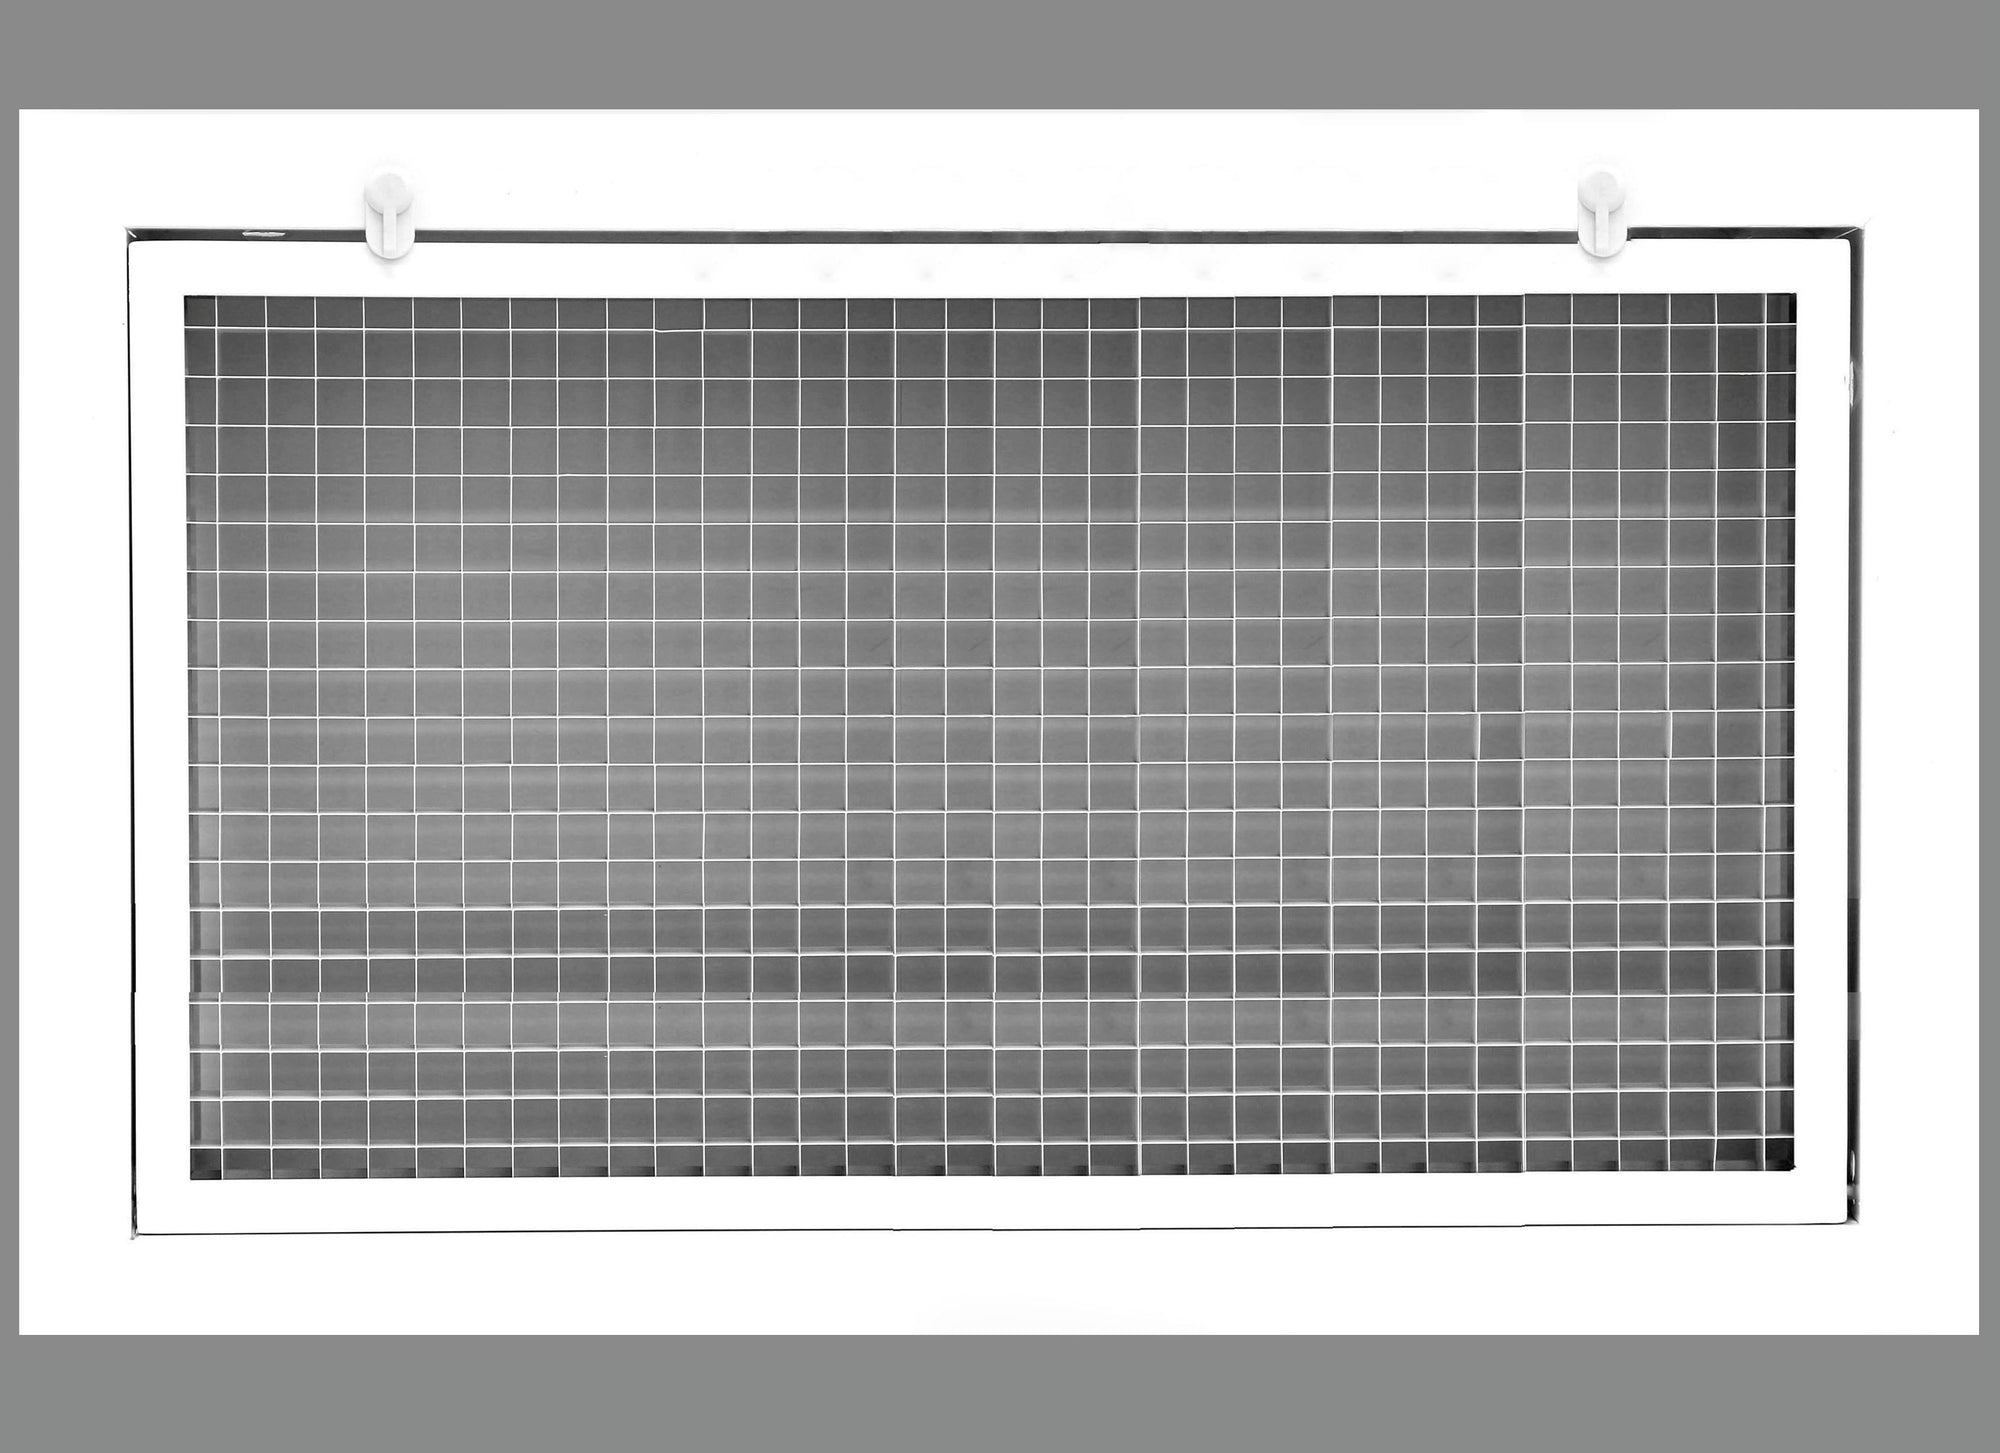 24" x 12" Cube Core Eggcrate Return Air Filter Grille for 1" Filter